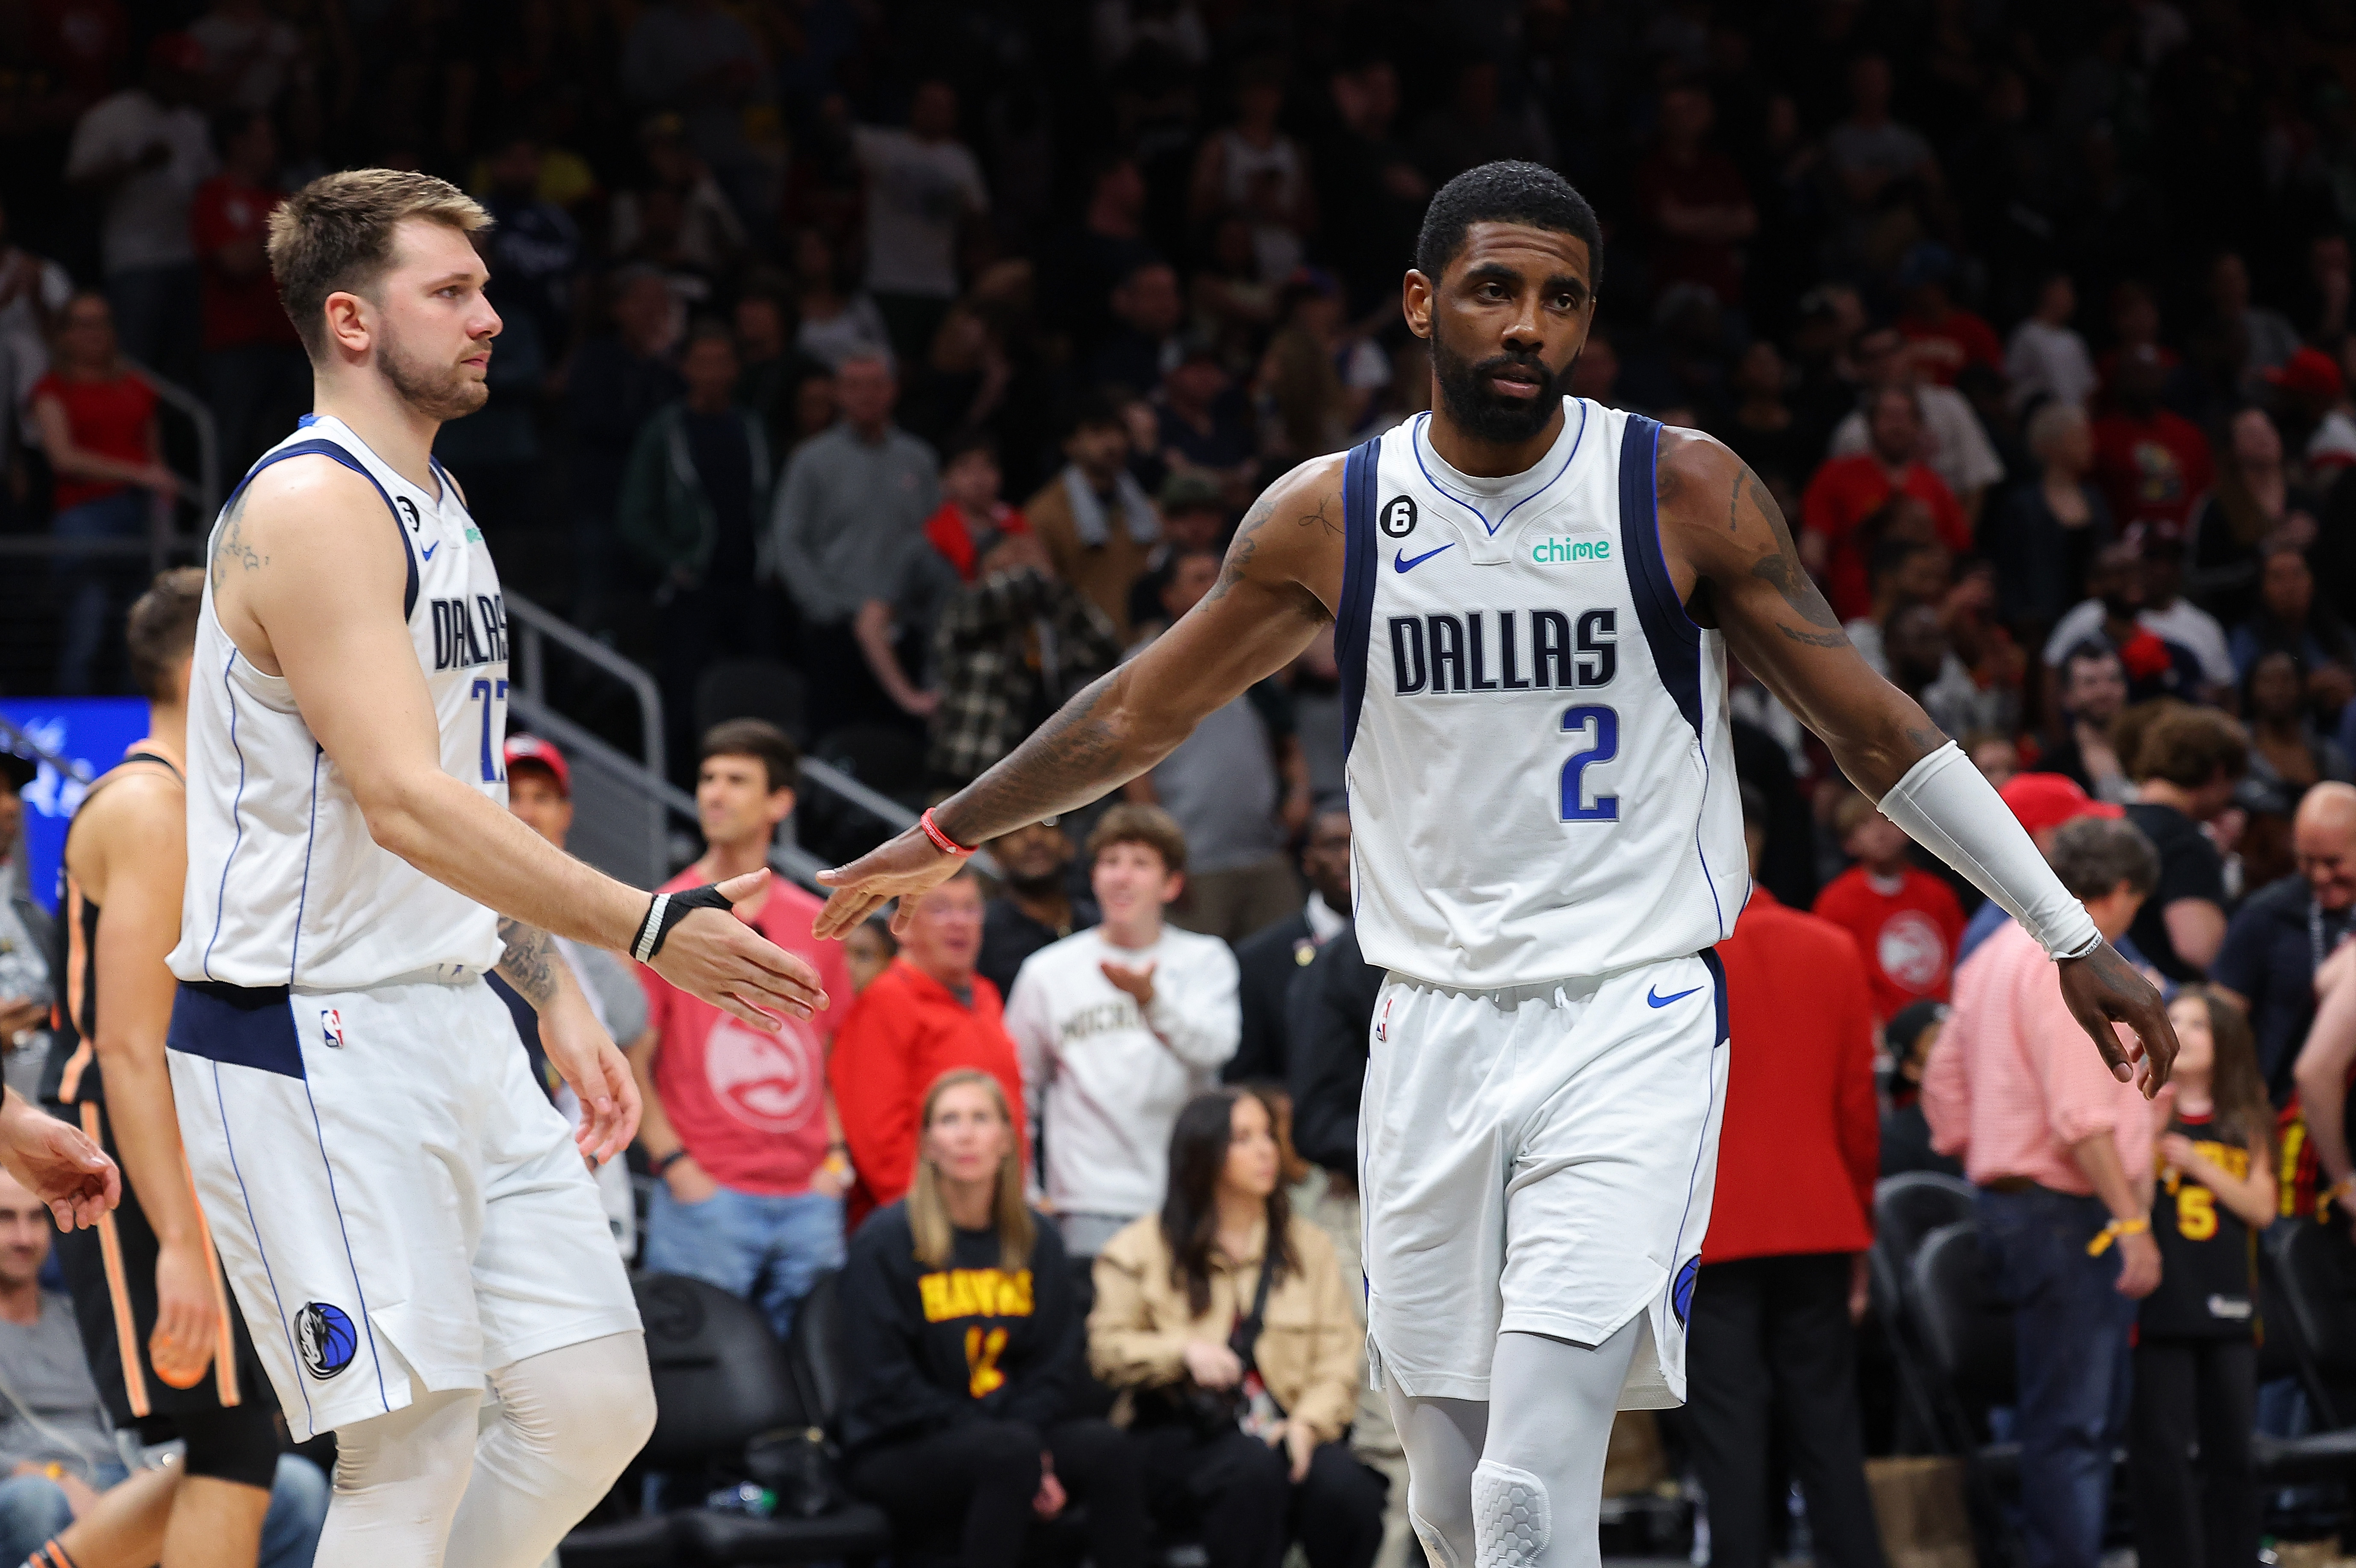 Inside the Kyrie Irving trade negotiations: Why the Mavericks beat